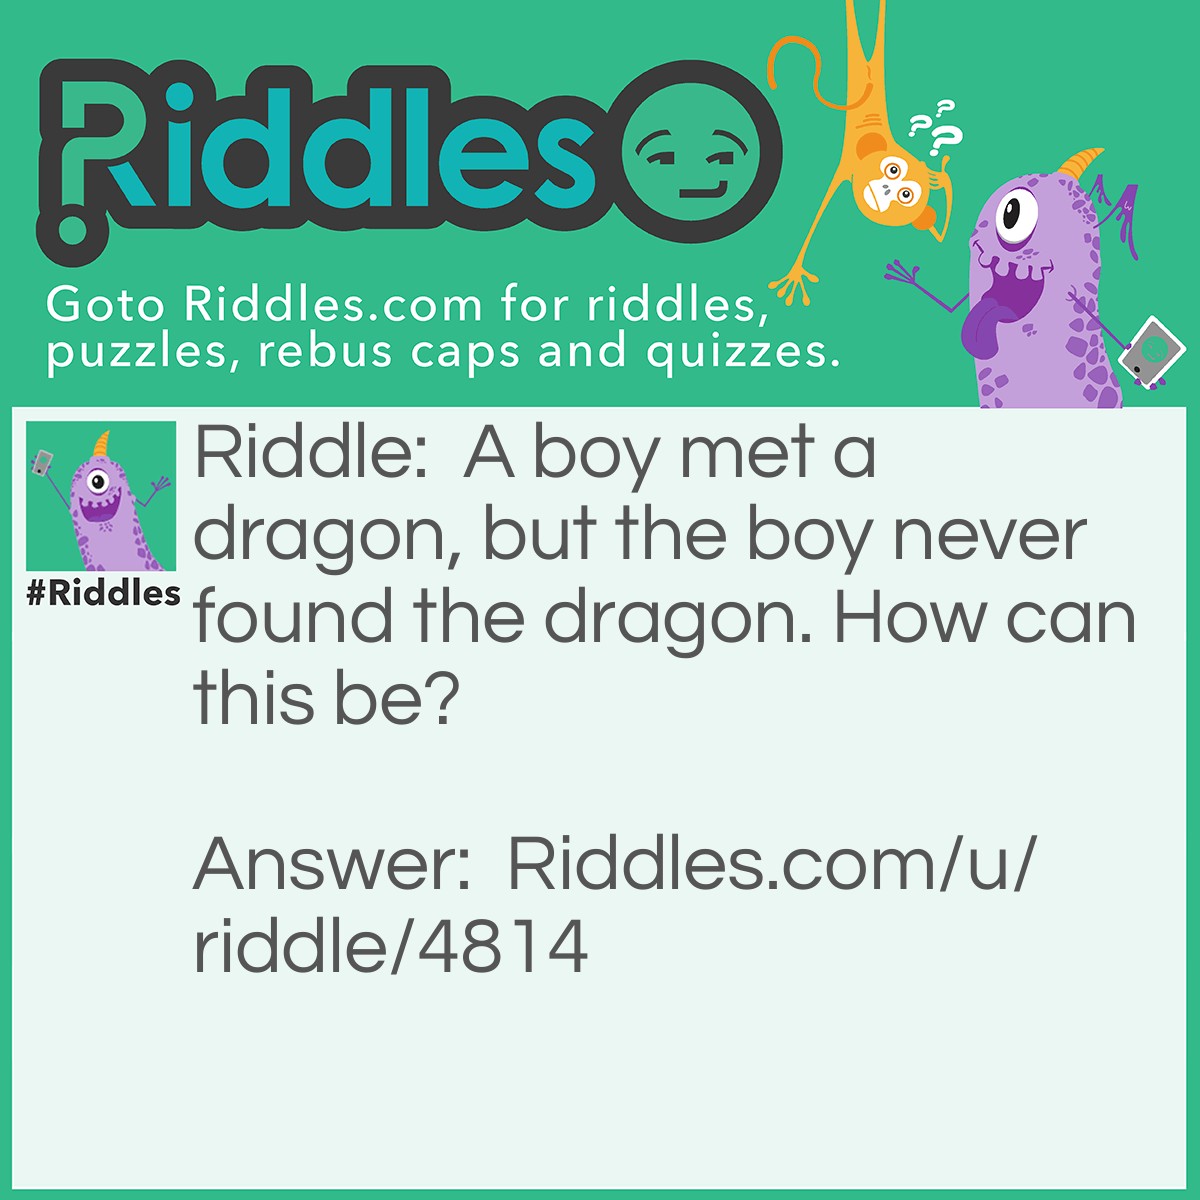 Riddle: A boy met a dragon, but the boy never found the dragon. How can this be? Answer: The dragon found the boy!